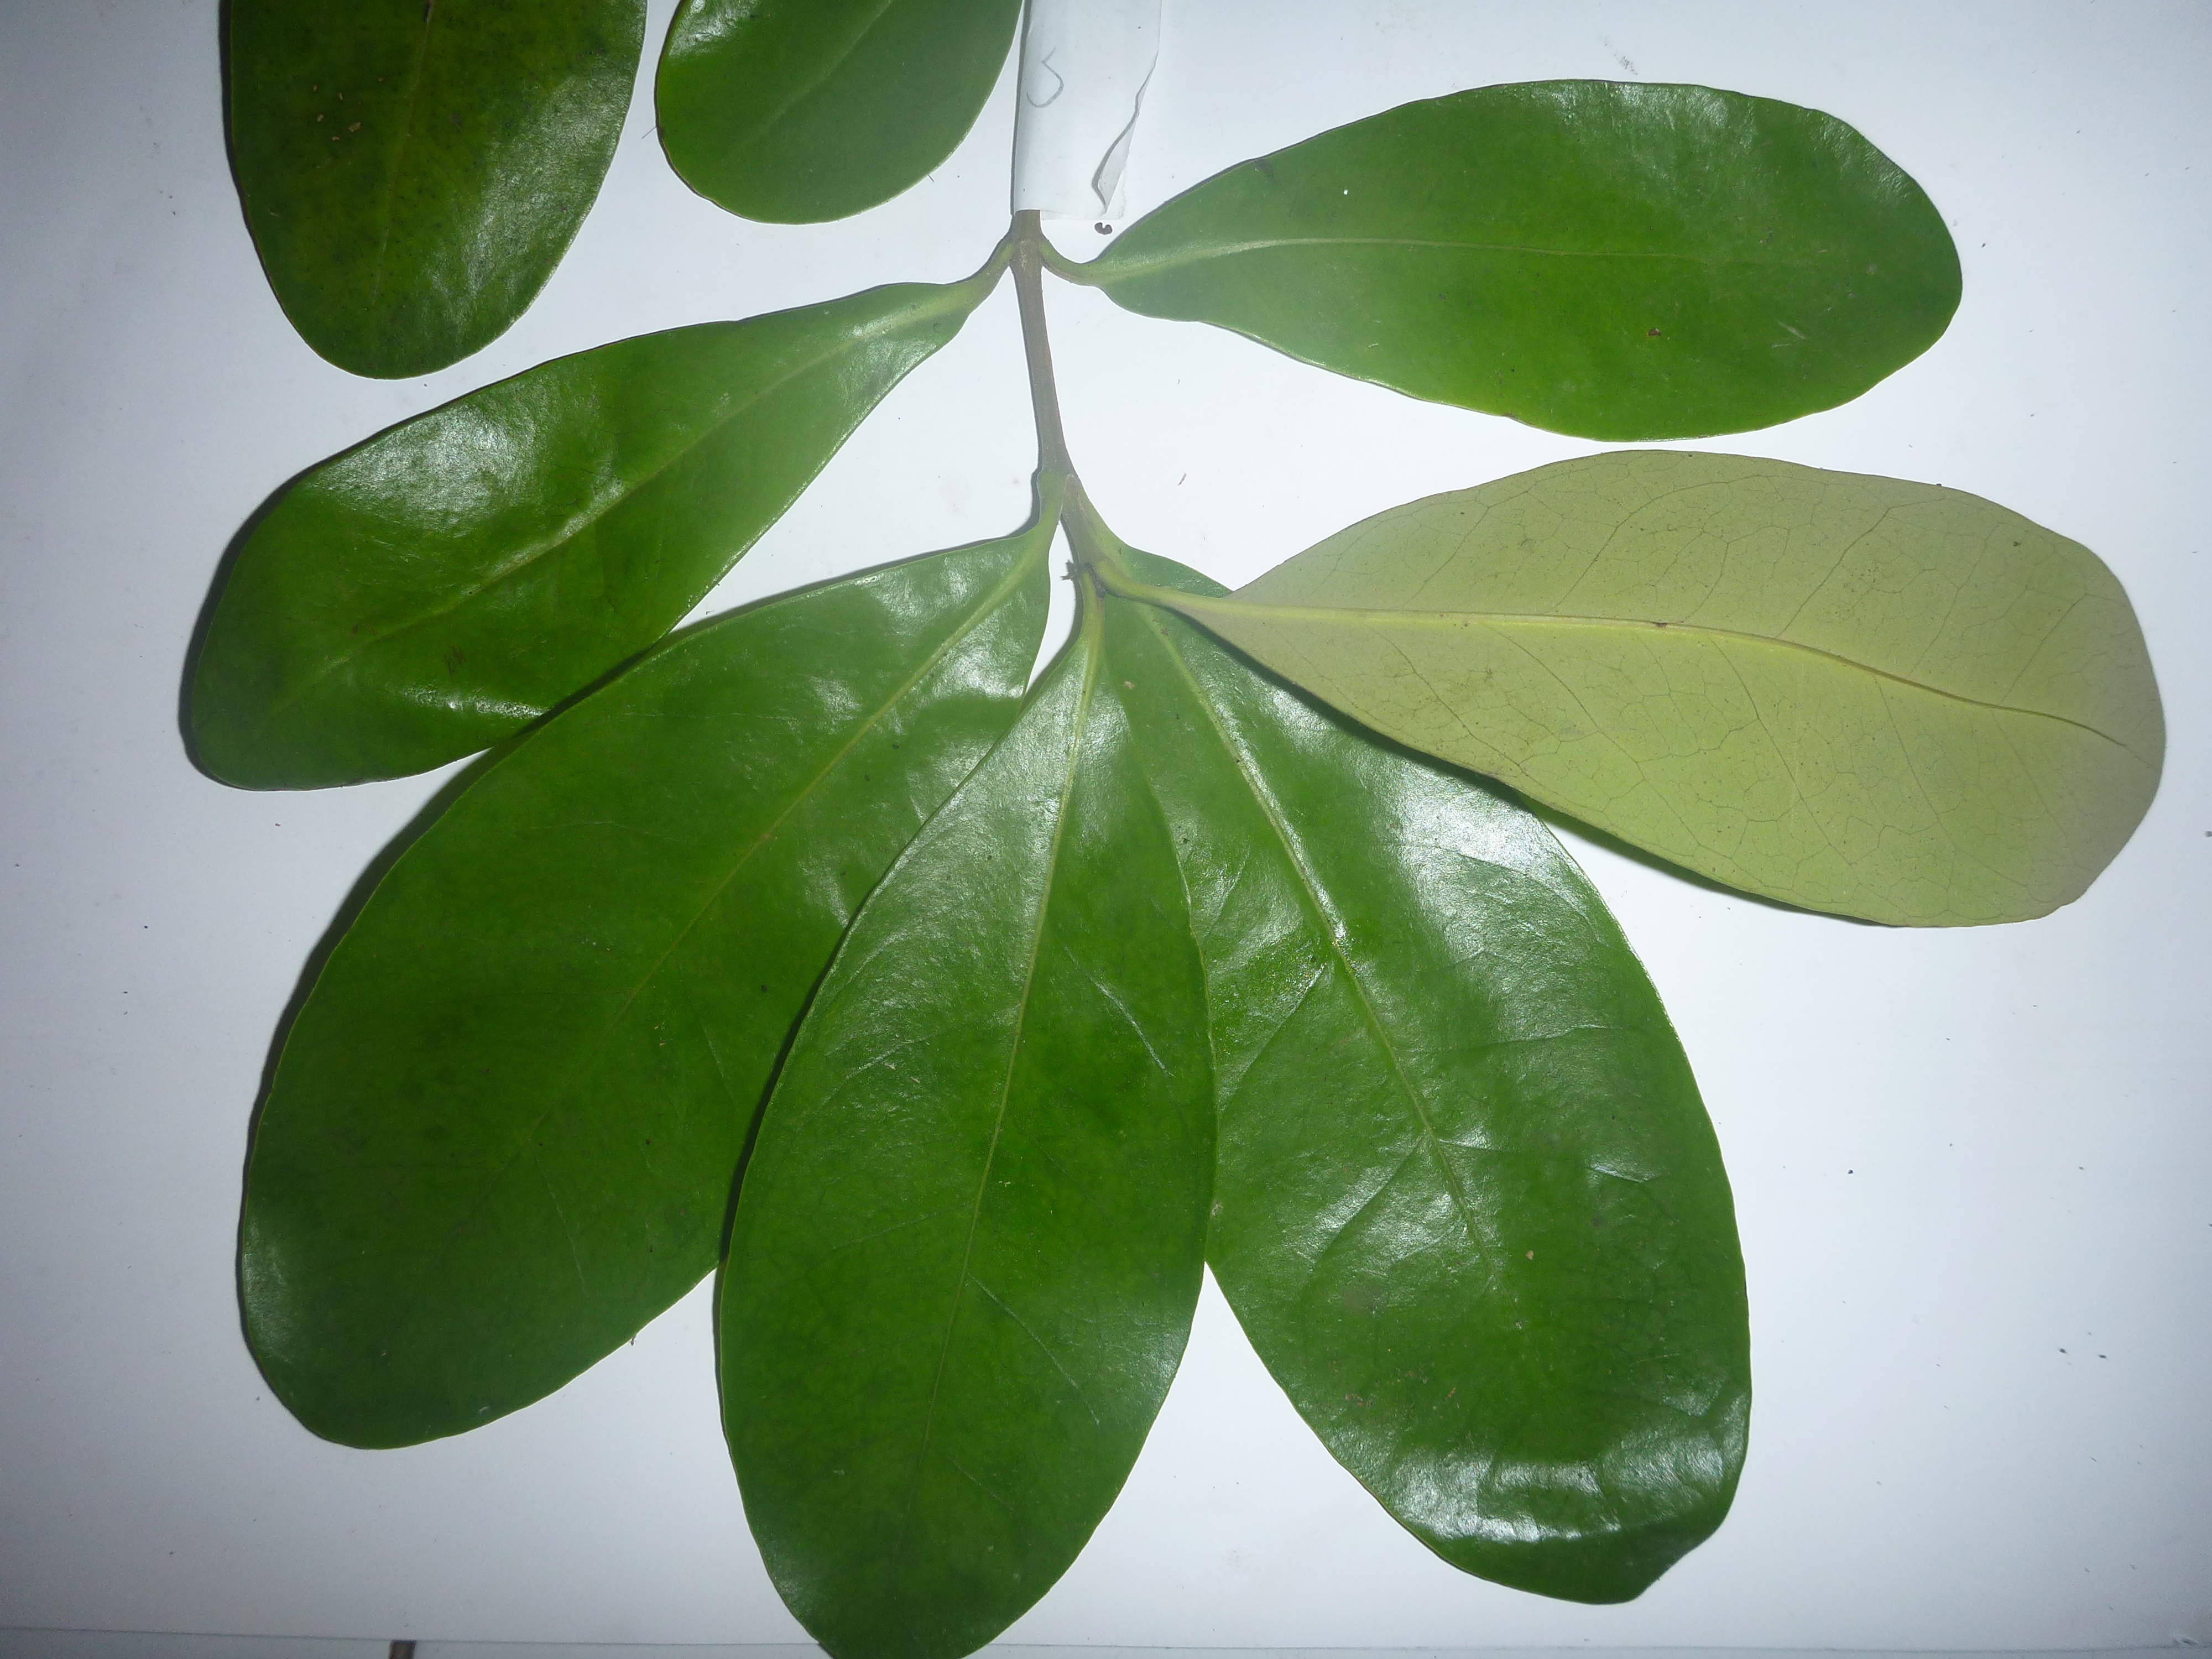 Anyone familiar with this mangrove leaf species?